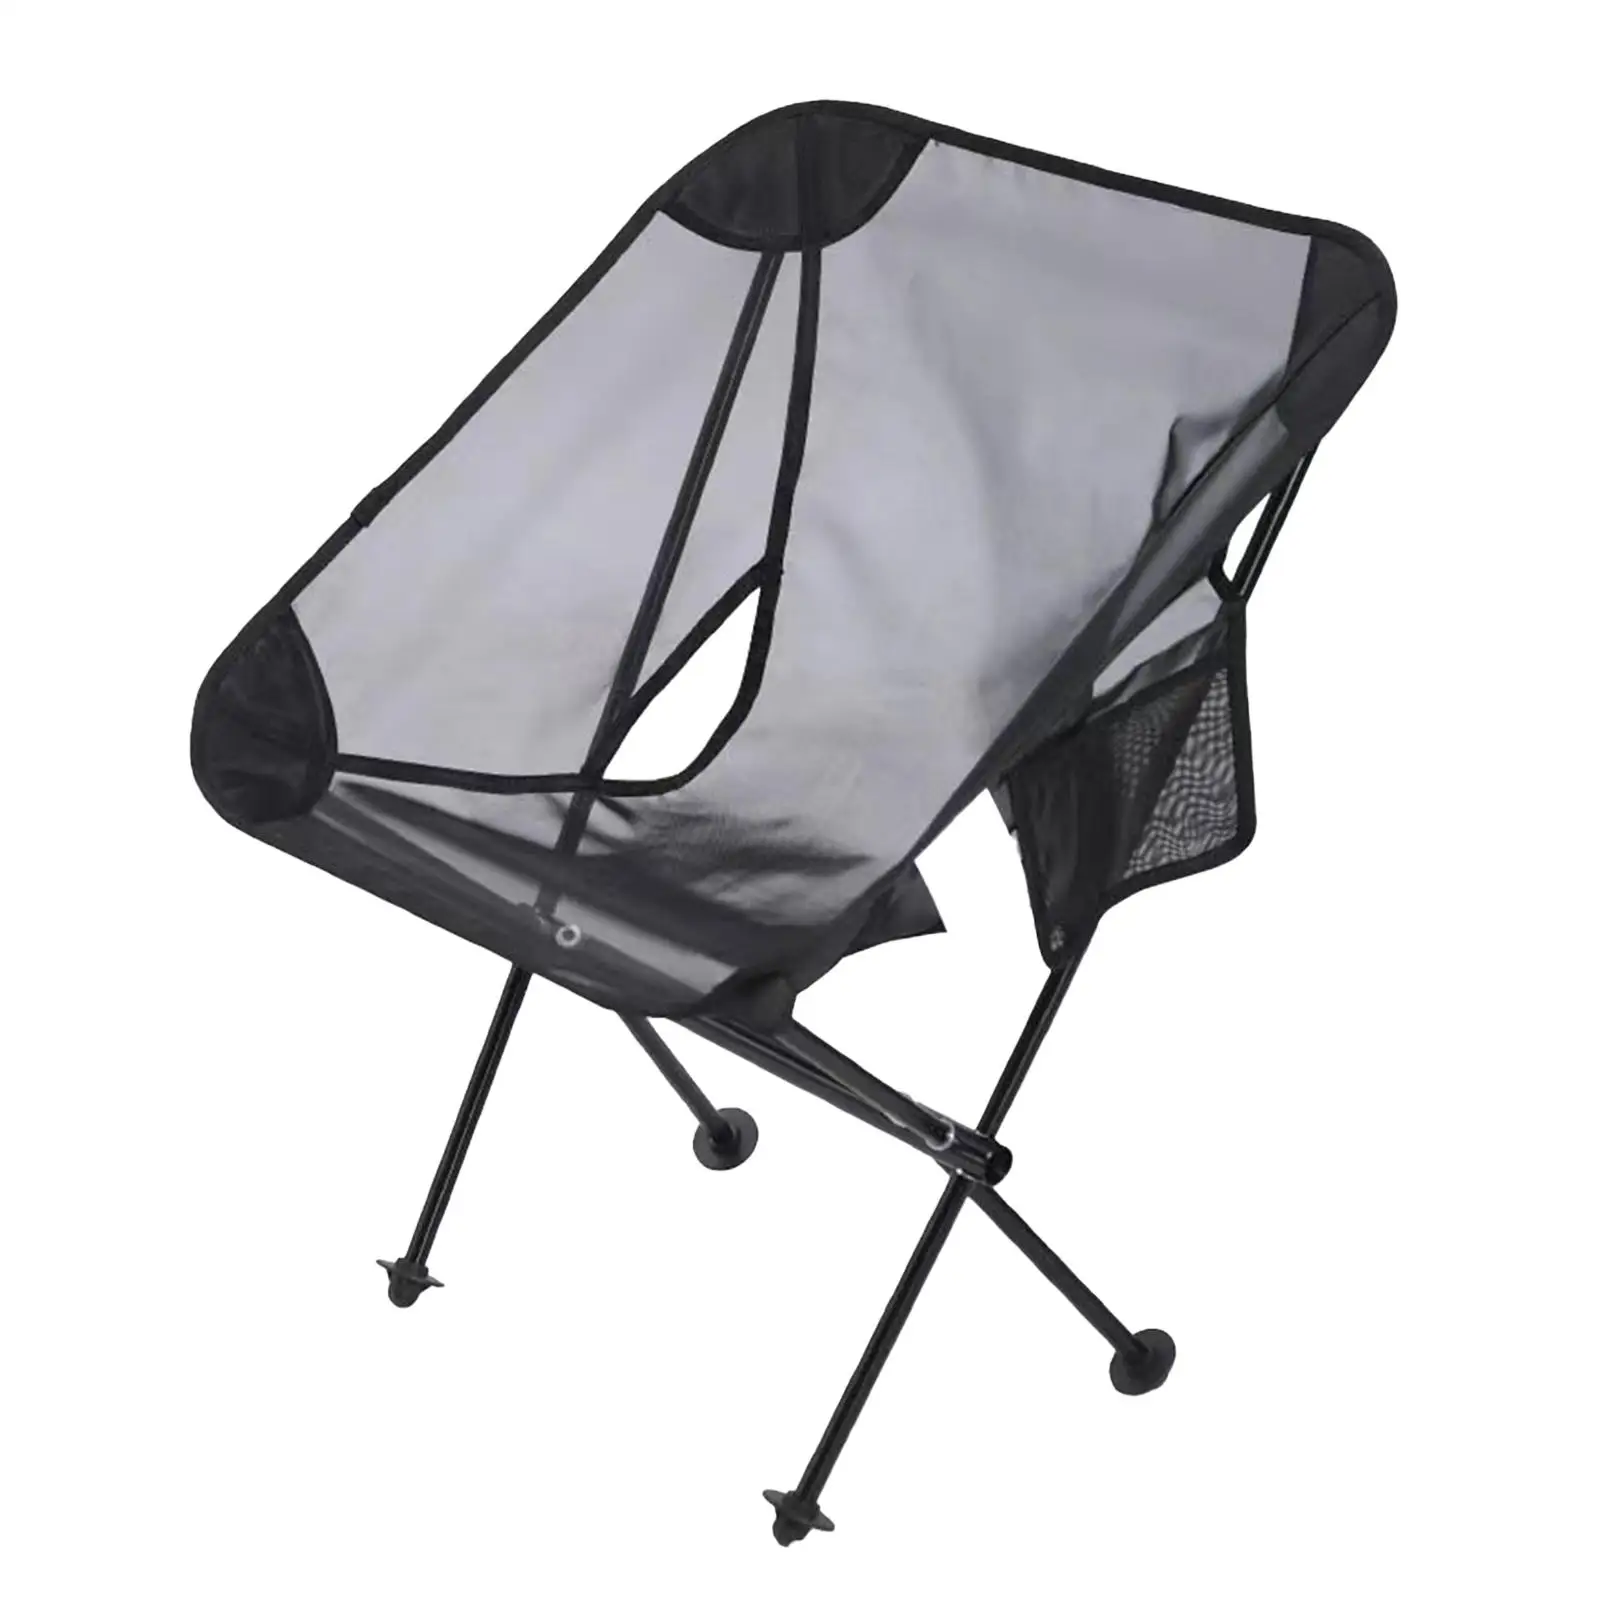 Folding Camping Chair Outdoor Concerts Picnics Hiking Campings Accessory Travels Backpacking Portable Folding Chair Beach Chair